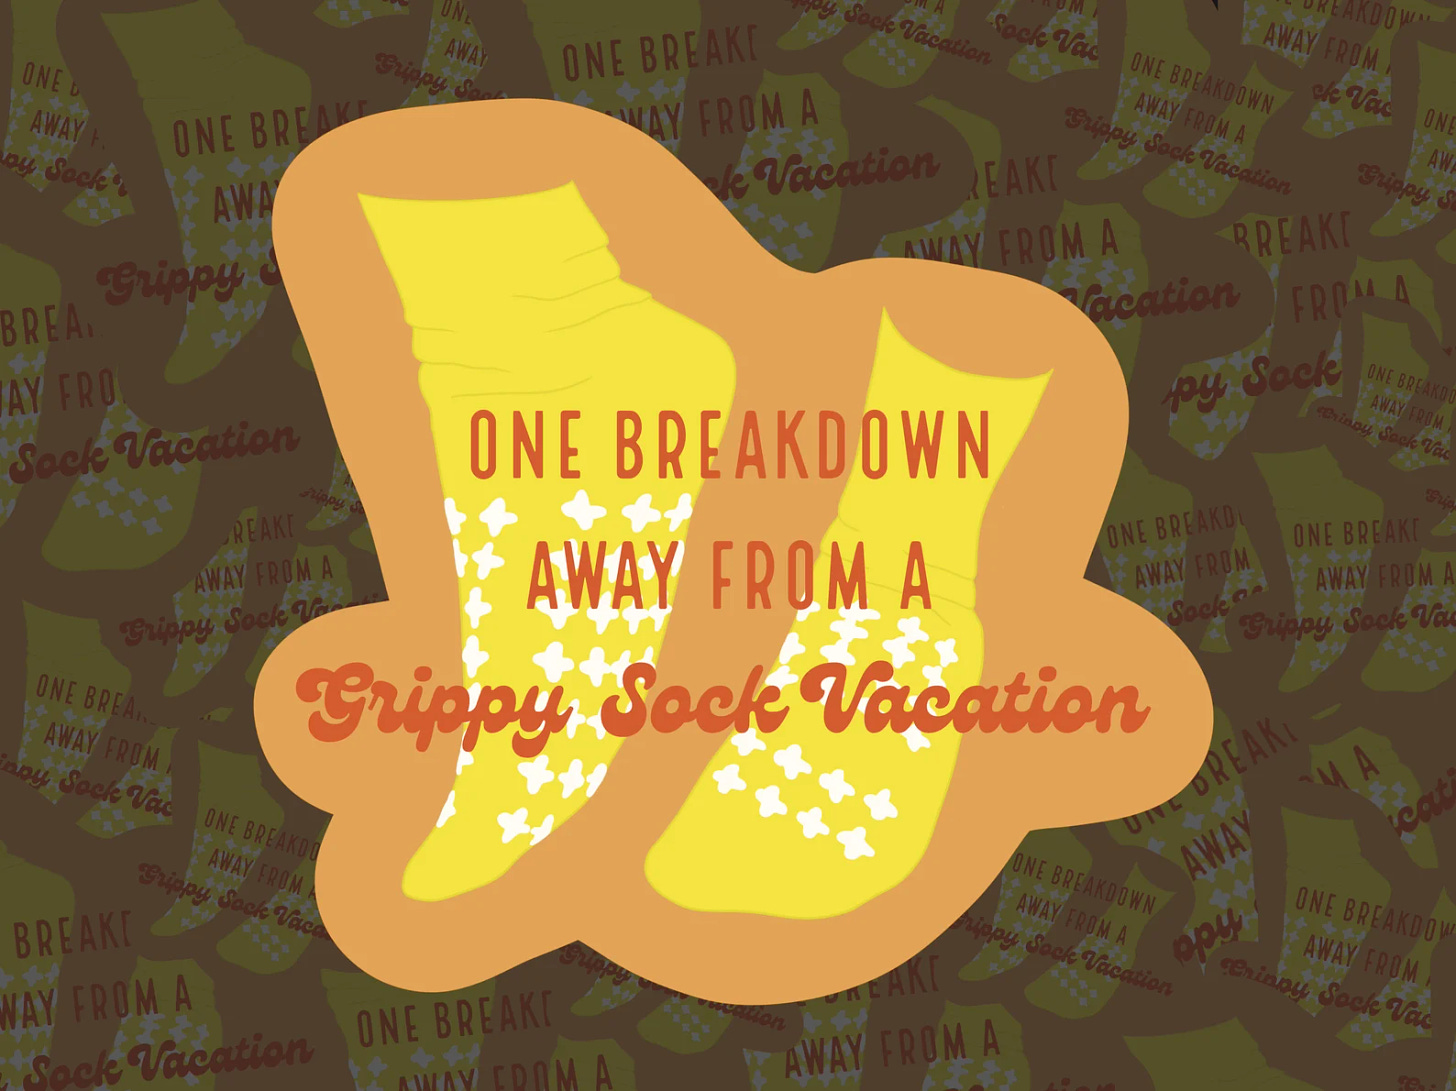 Disturbingly, you can buy grippy-sock-vacation stickers on Etsy—#grippysockvacation